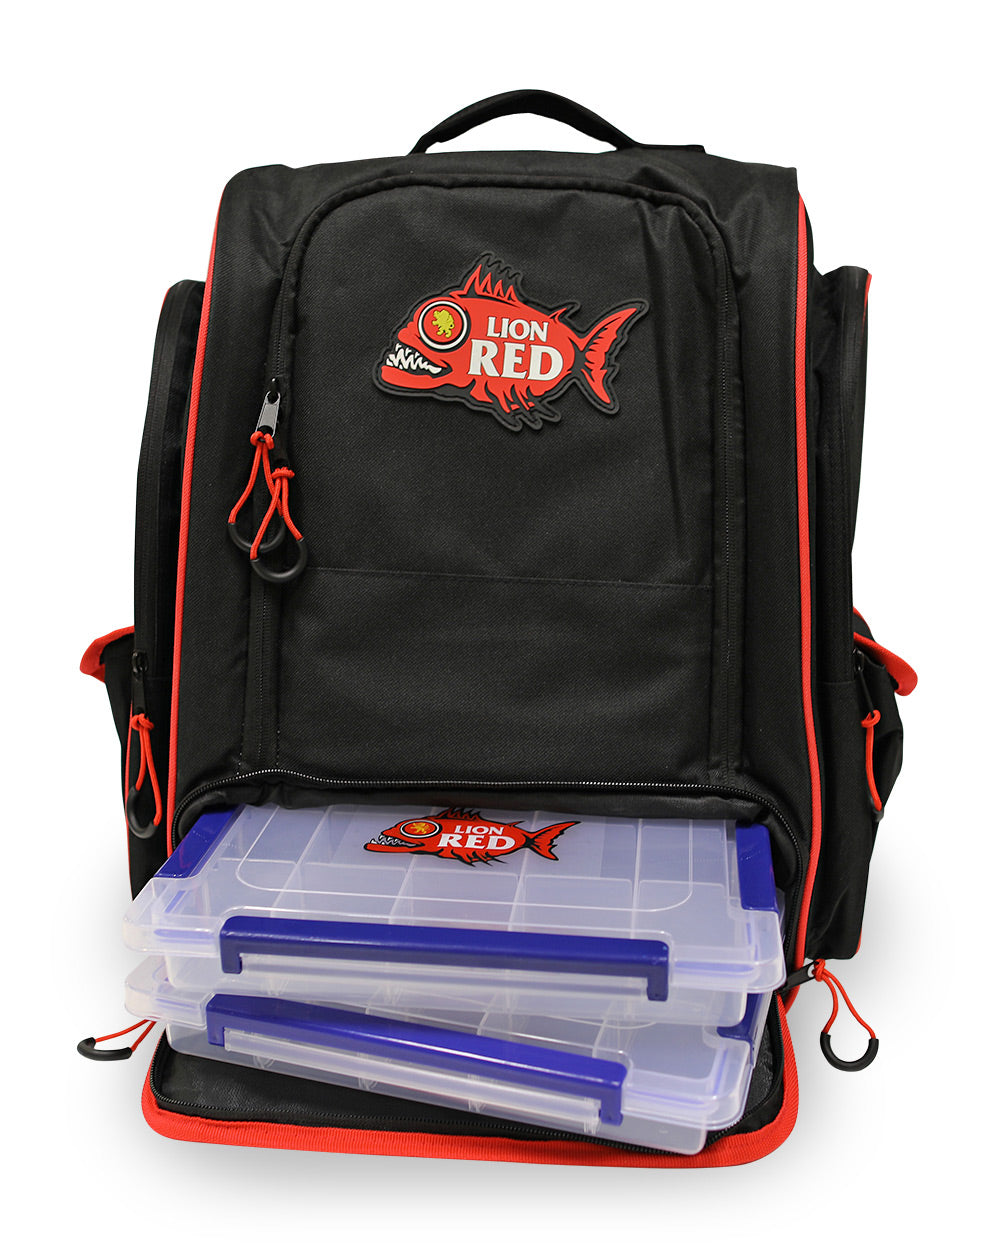 Lion Red Fishing Bag -  Beer Gear Apparel & Merchandise - Speights - Lion Red - VB - Tokyo Dy merch